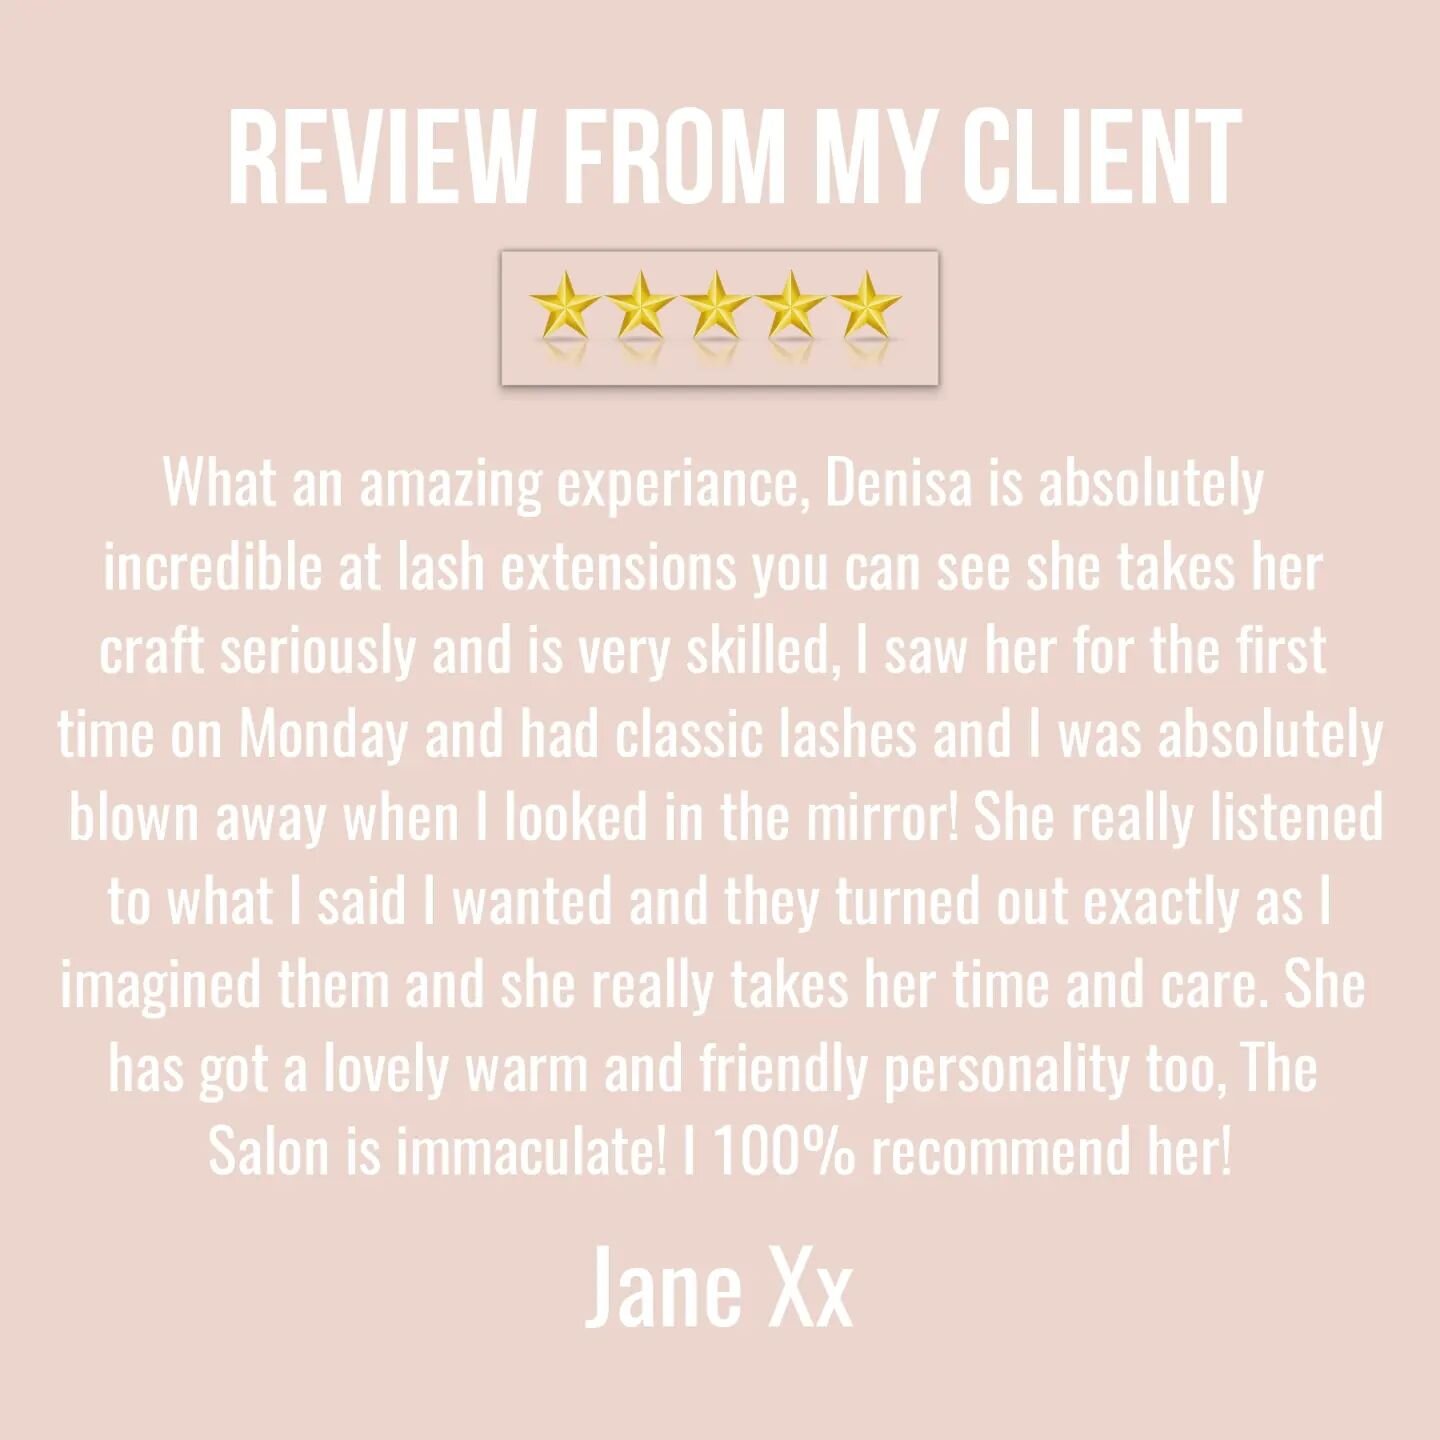 Lovely review from my happy client 🥰&hearts;️

#testimonial #review #beauty #beautybrighton #brightonbeauty #brightonbrows #brightonlashes #brightonlife #brightongirl #brighton #brightonandhove #client